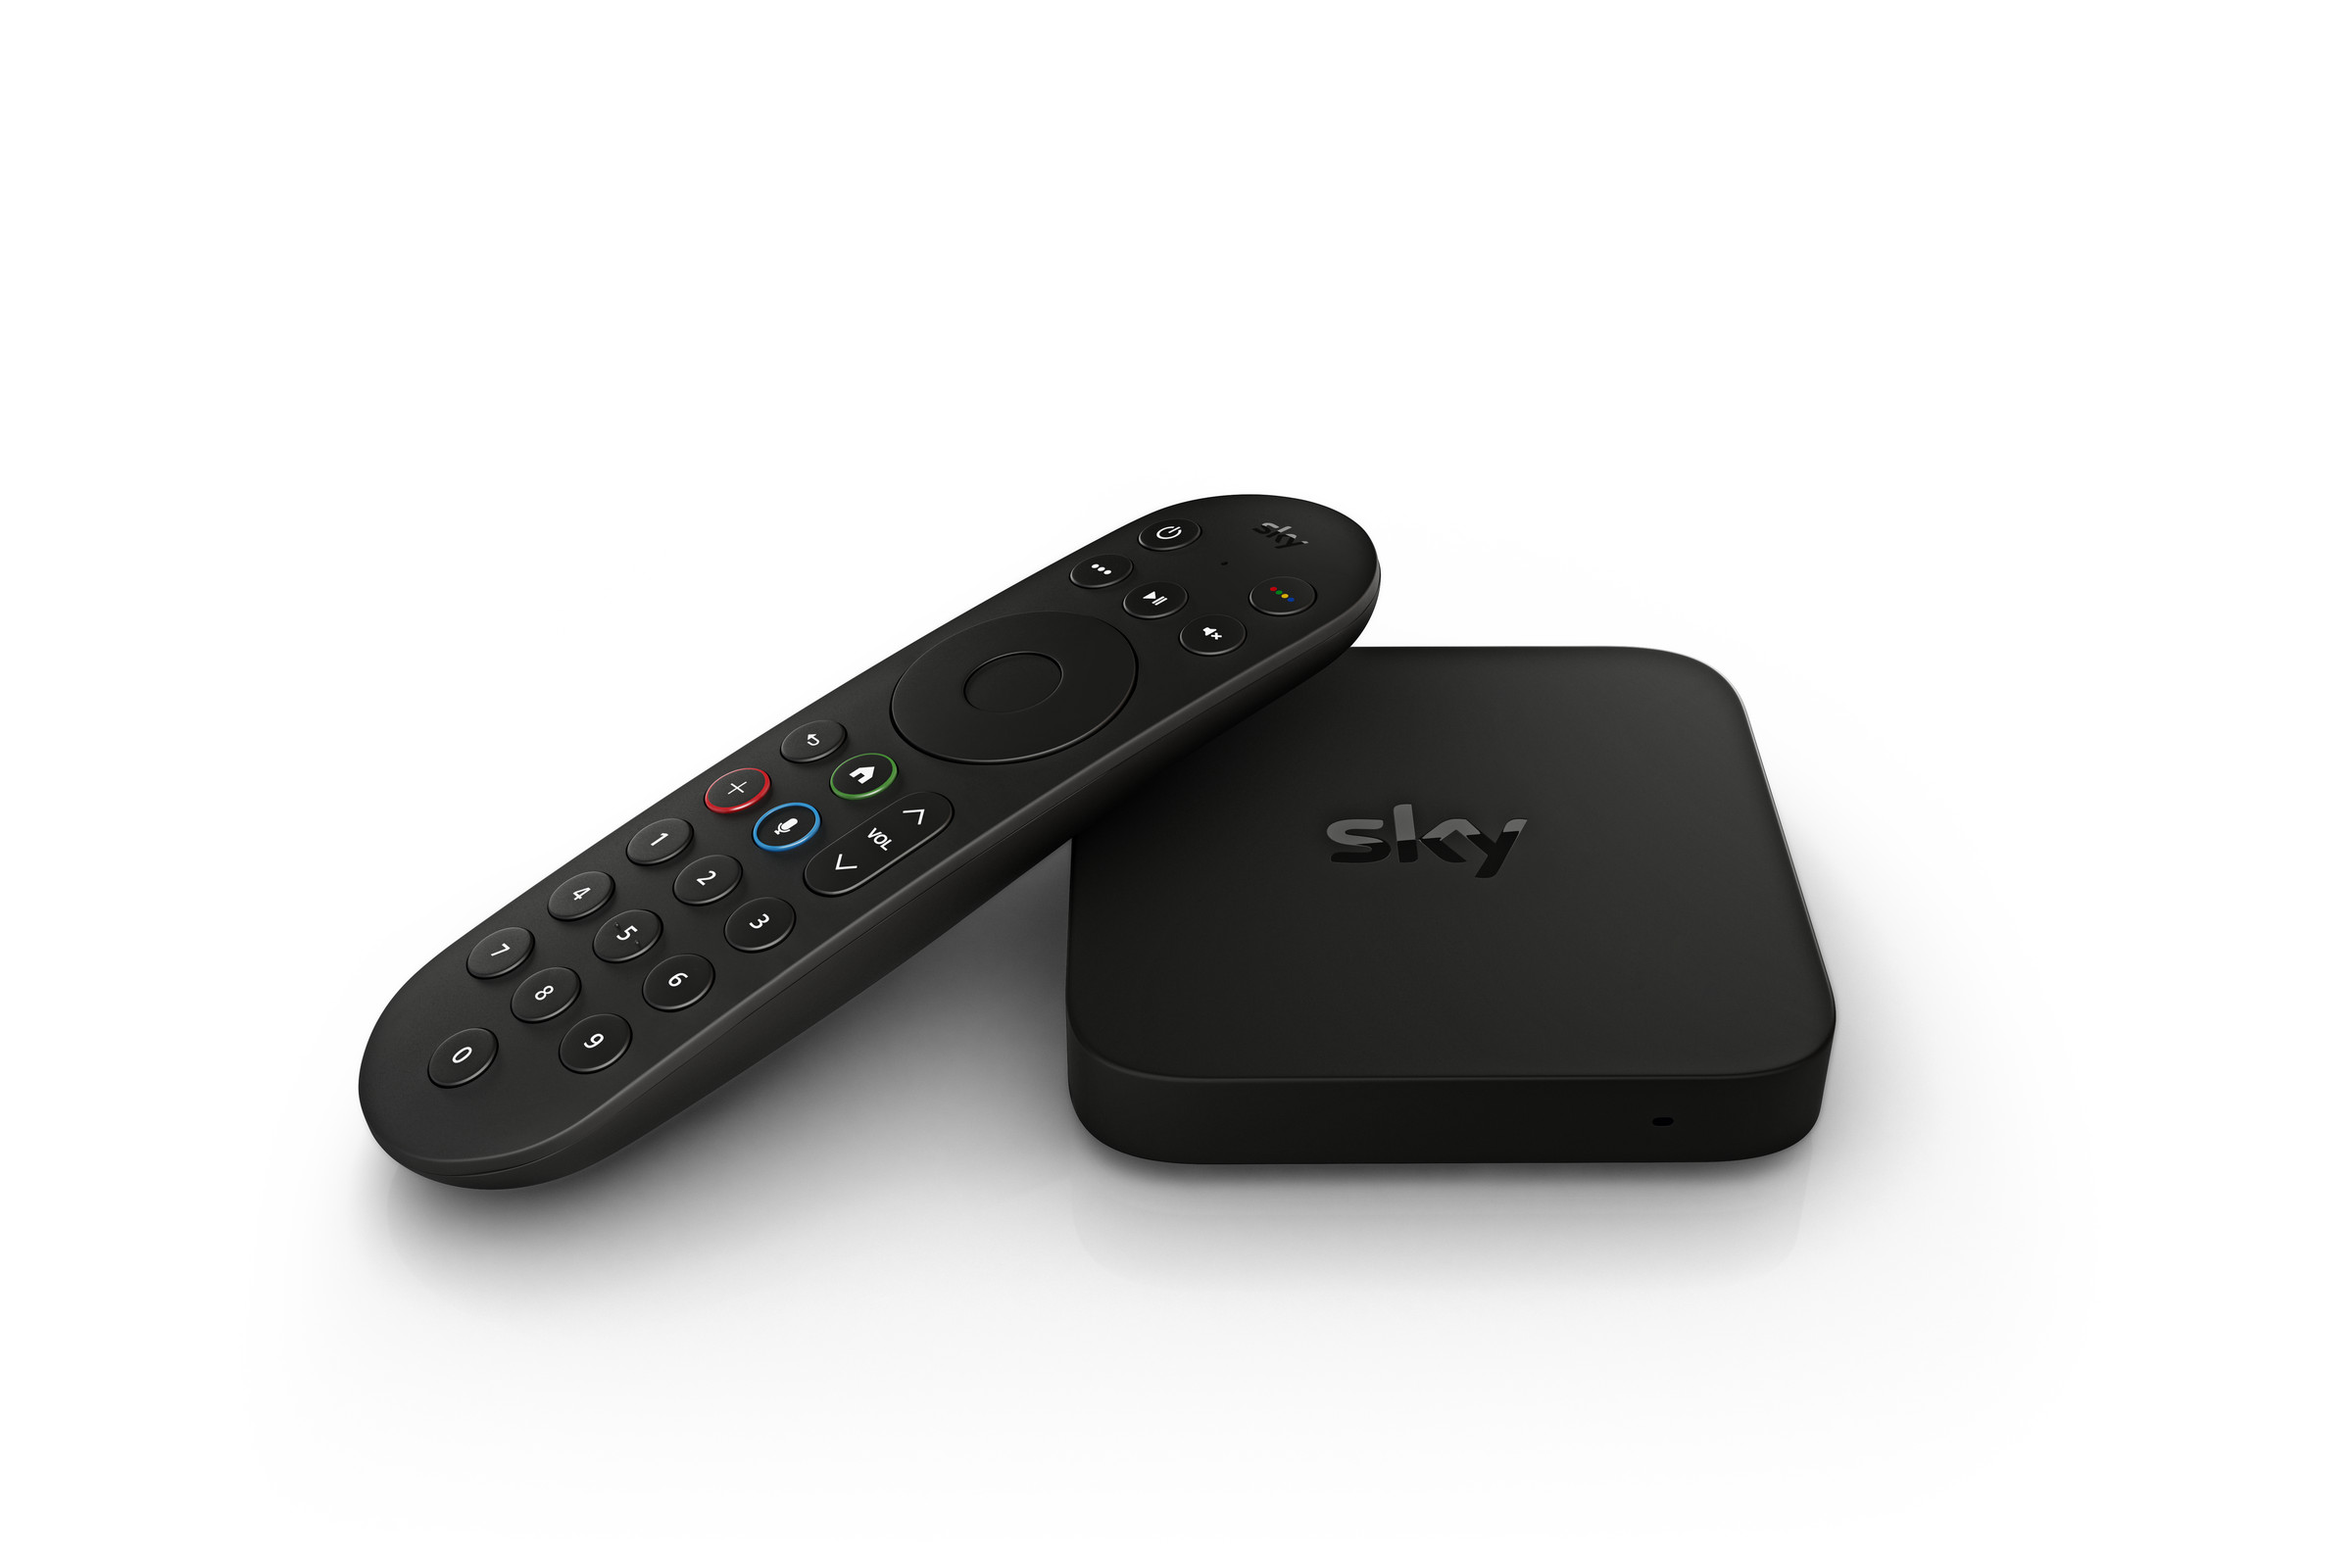 The Sky Stream puck with a remote for streaming access to Sky TV content